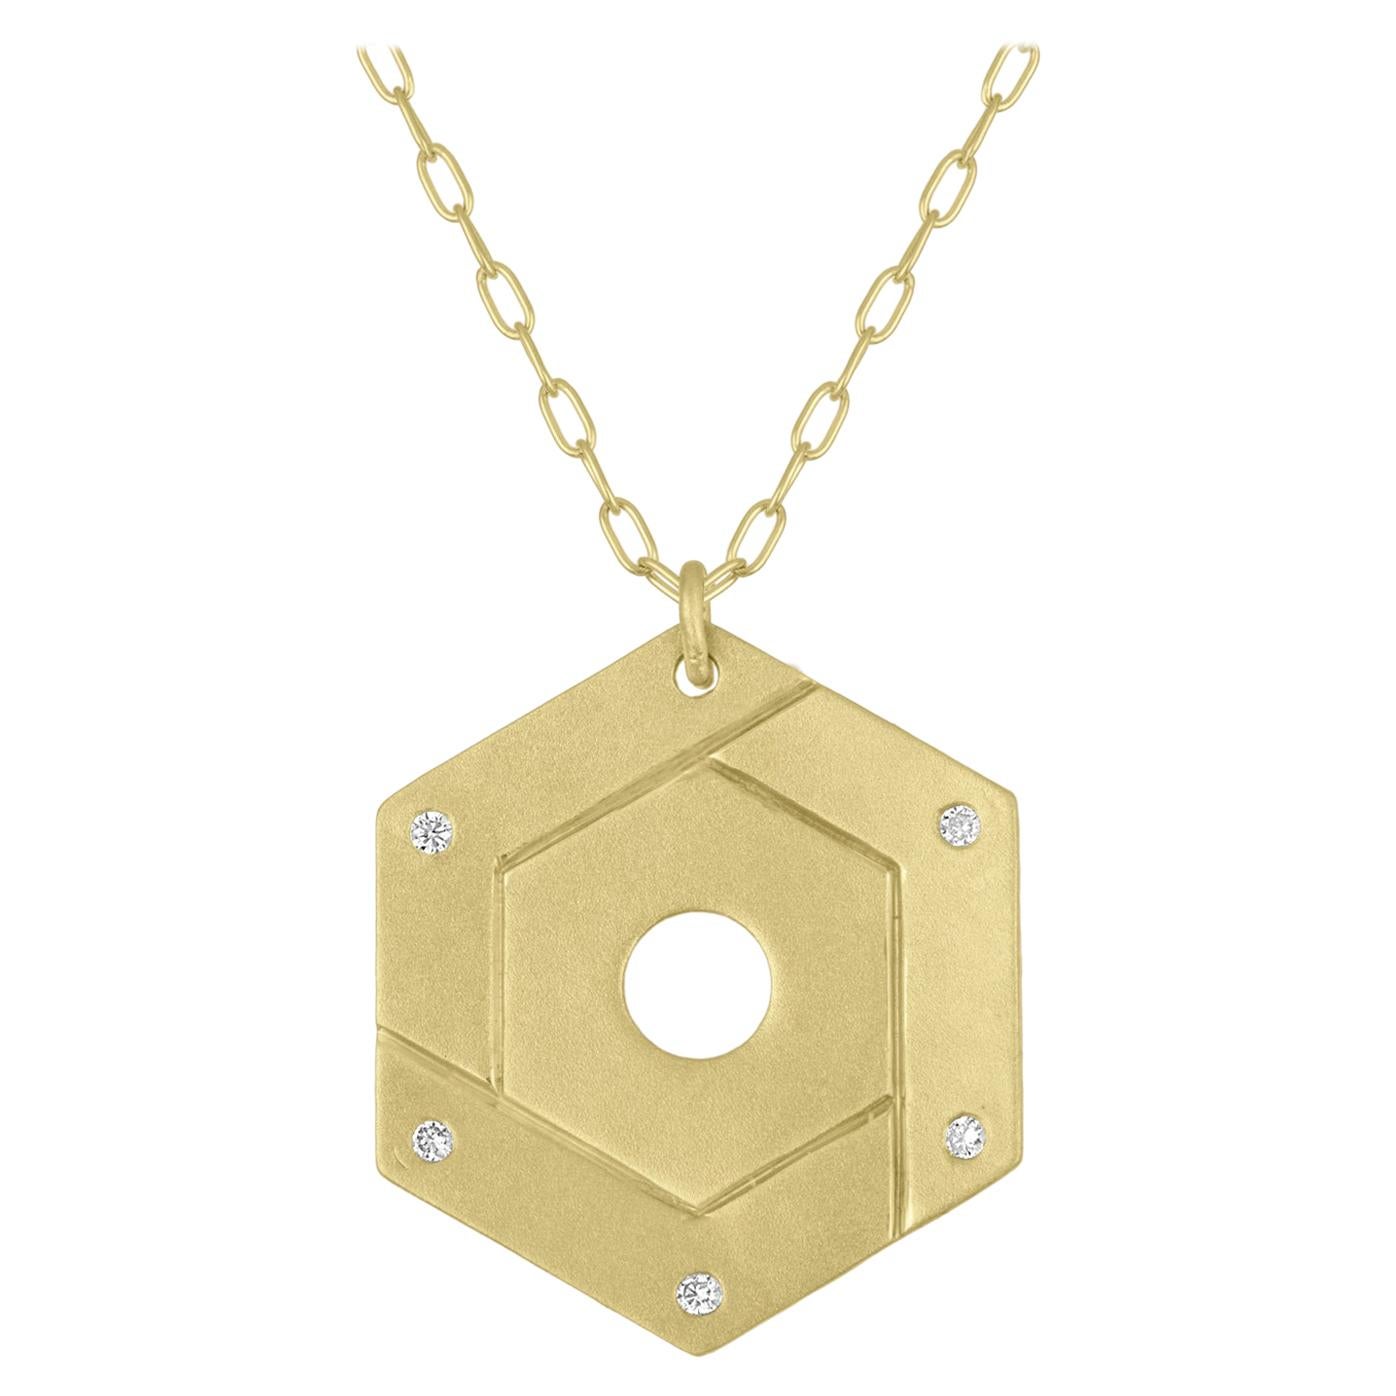 TATE Open Hexagon 18 Karat Green Gold with Diamond Accents Necklace Chain For Sale